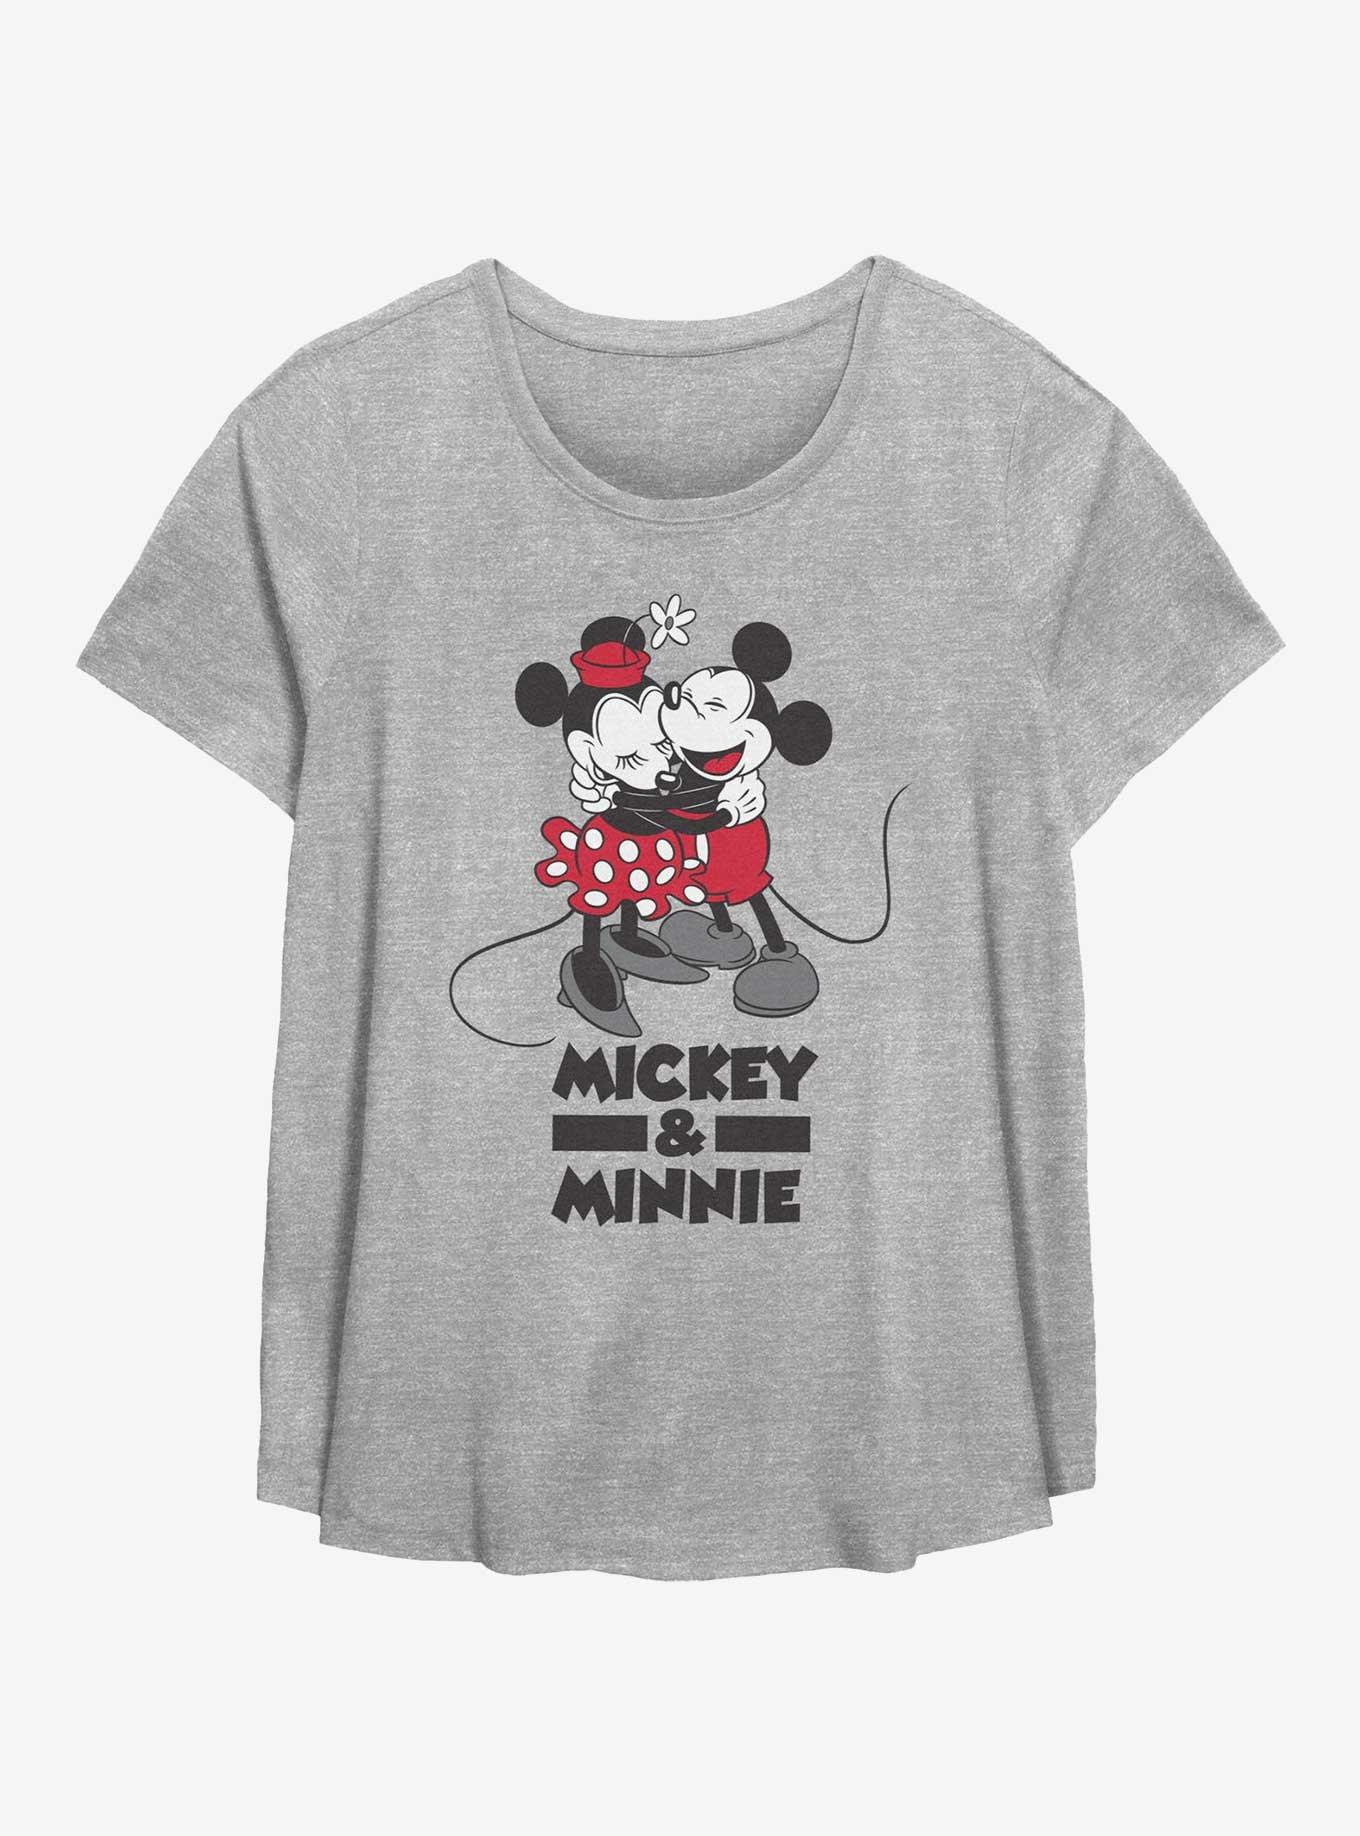 Disney Mickey Mouse & Minnie Mouse Laugh Girls T-Shirt Plus Size, HEATHER GR, hi-res